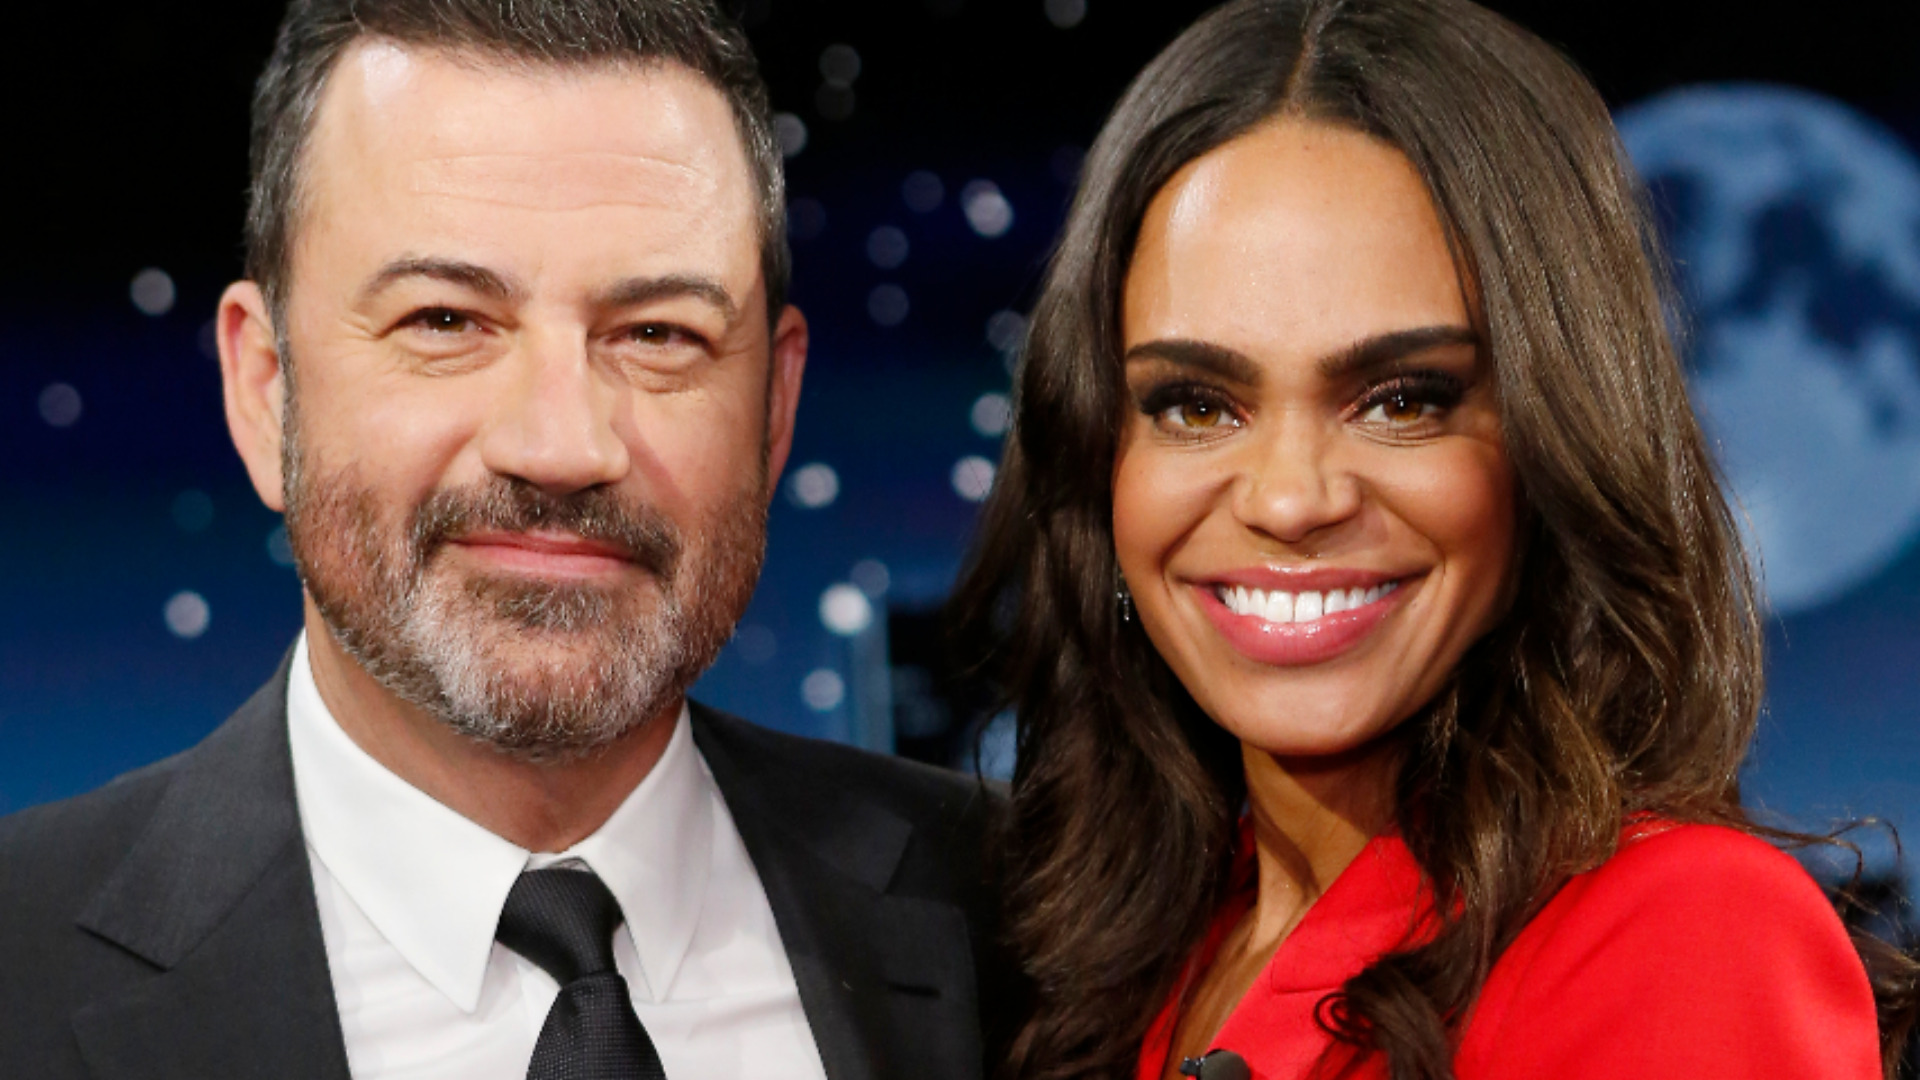 Jimmy Kimmel and ‘The Bachelorette’ 2021 star Michelle Young pose together on ‘Jimmy Kimmel Live’